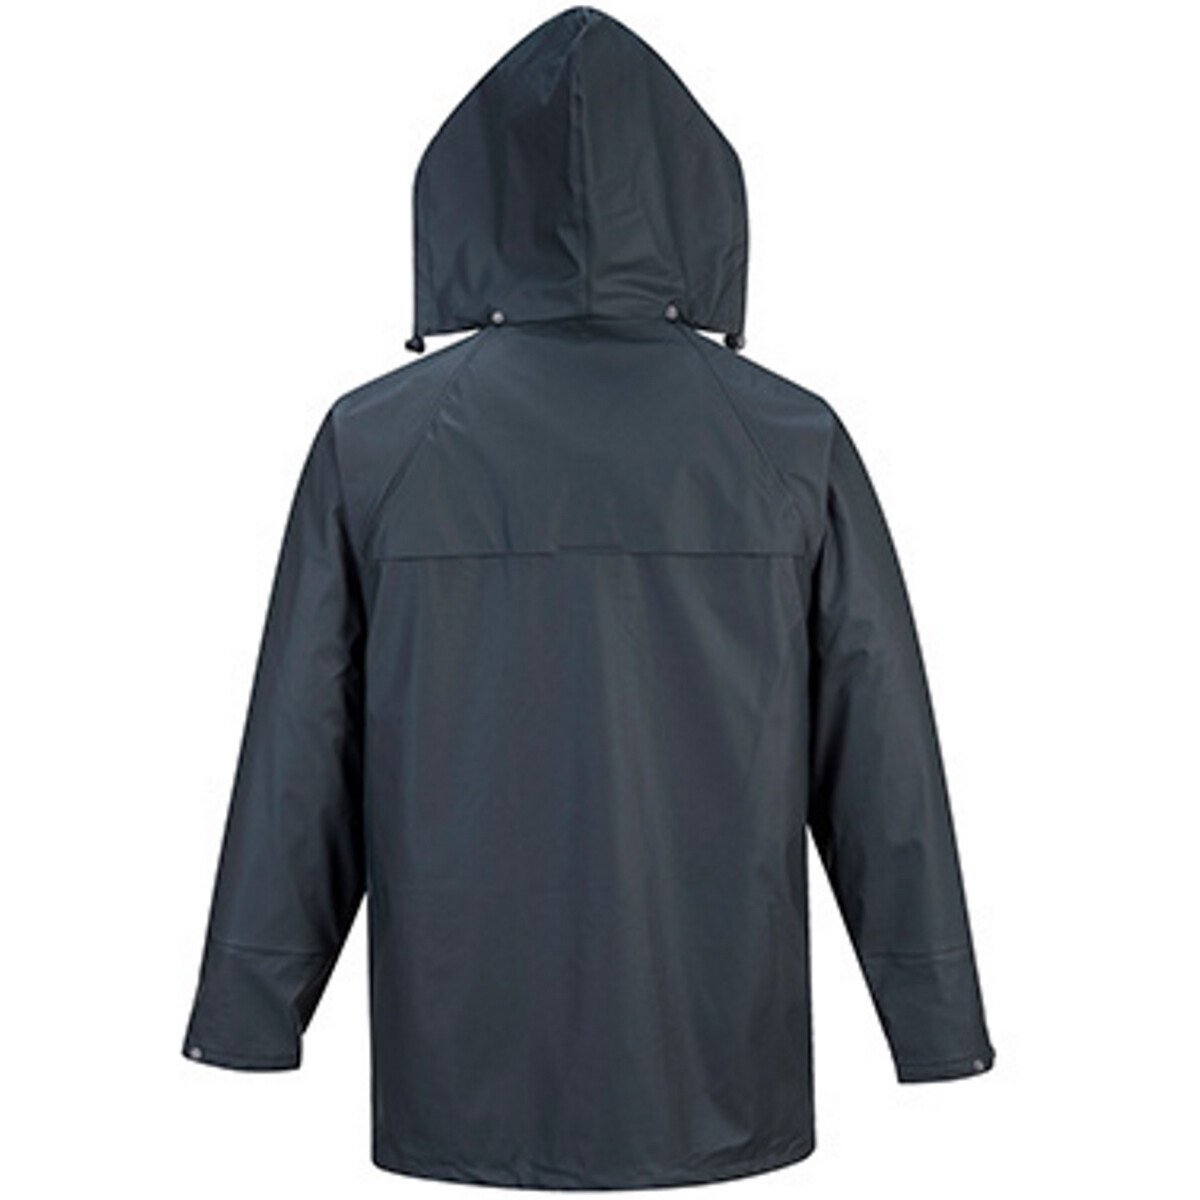 Portwest S450 Sealtex Classic Waterproof Jacket - 3 Colour Choice from ...